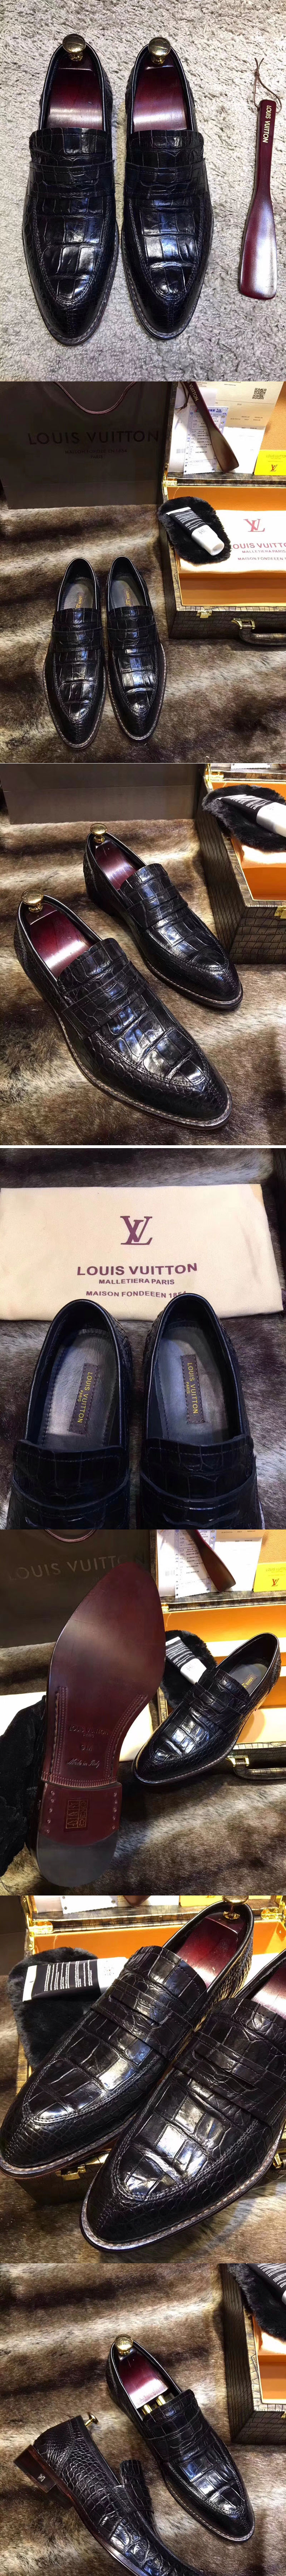 Replica Louis Vuitton Original Crocodile Leather Loafer and Shoes Black